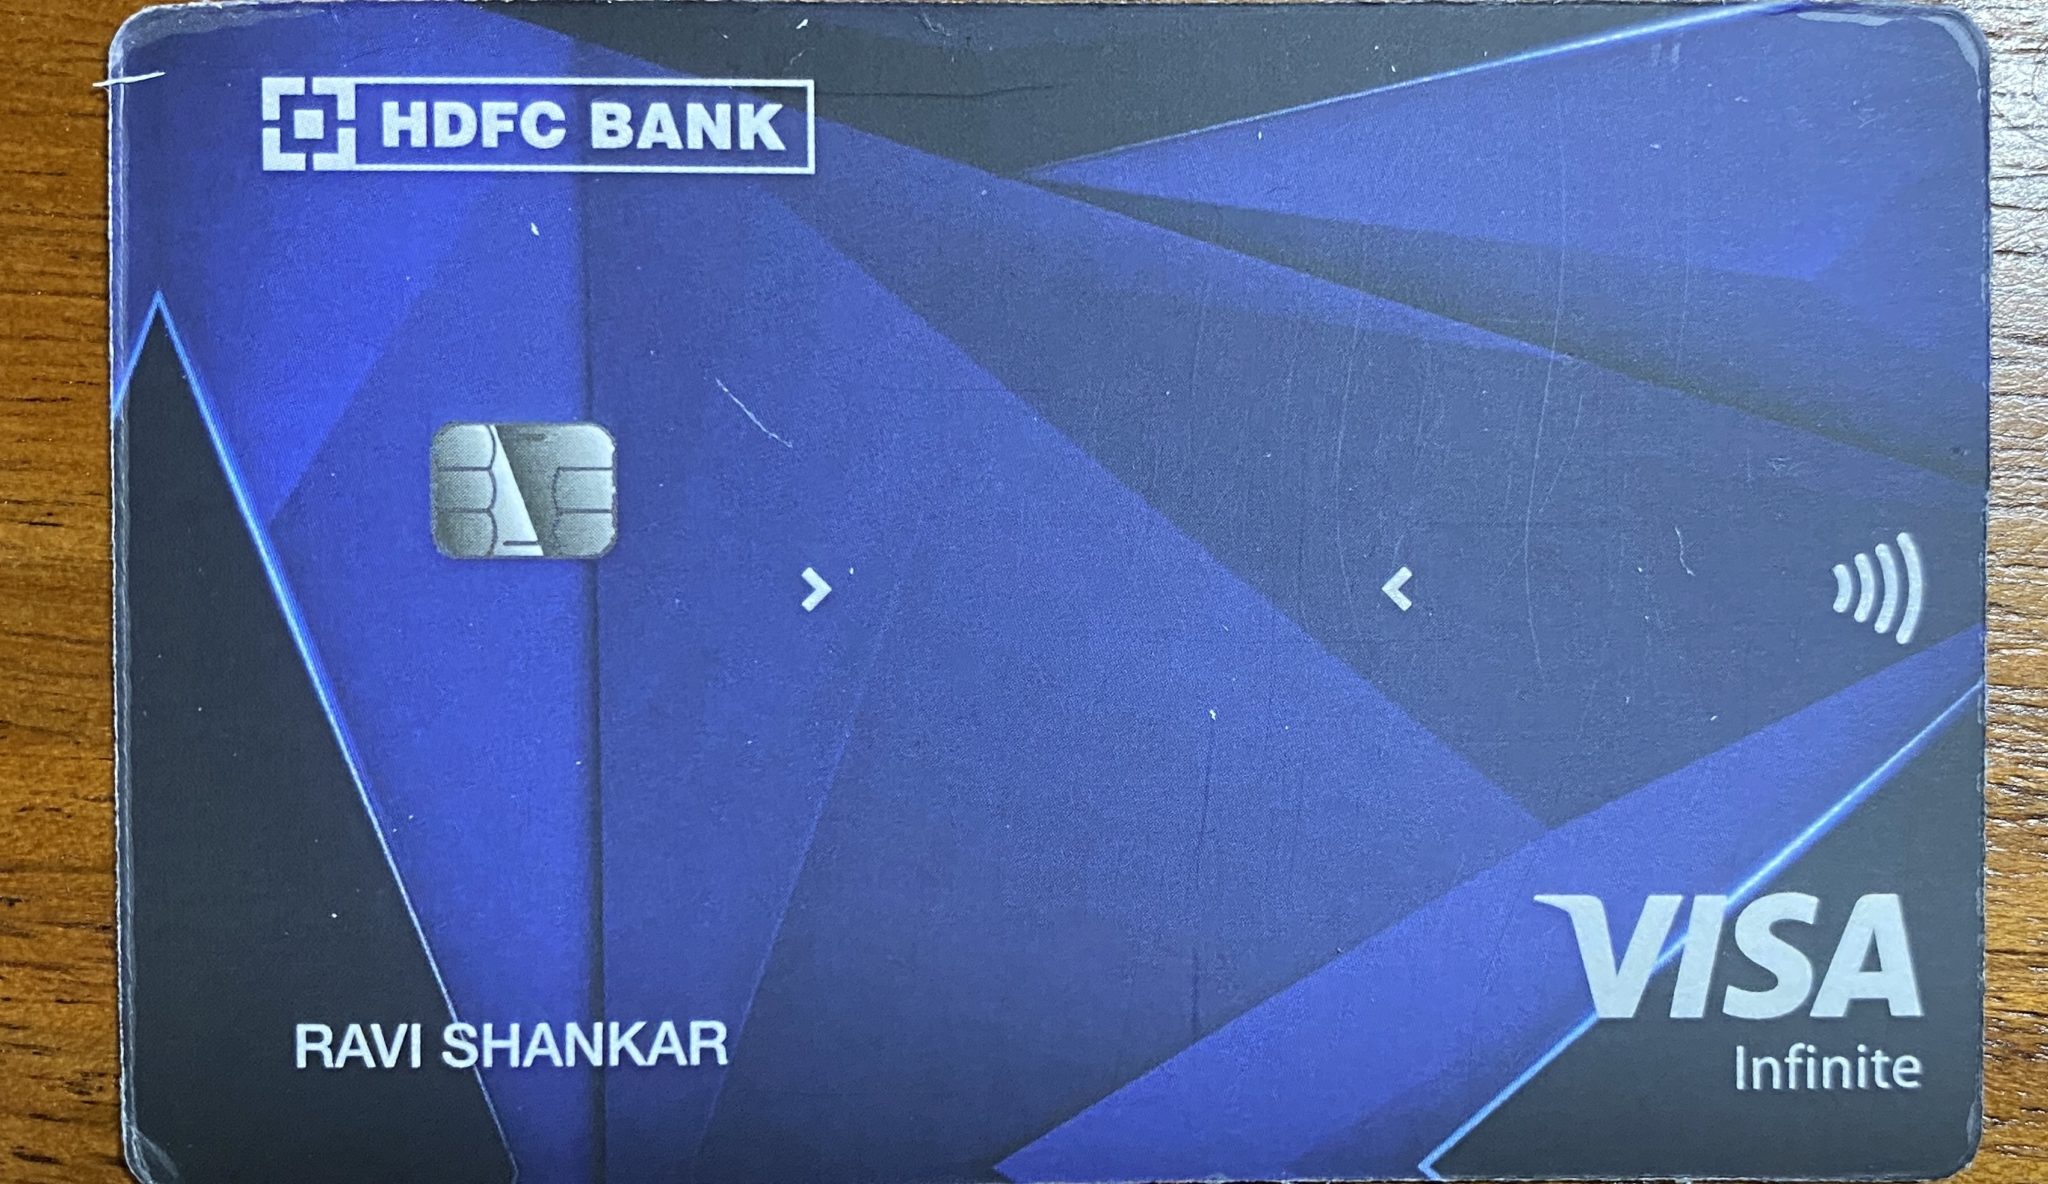 HDFC Bank Infinia Credit Card Metal Edition now live Live from a Lounge